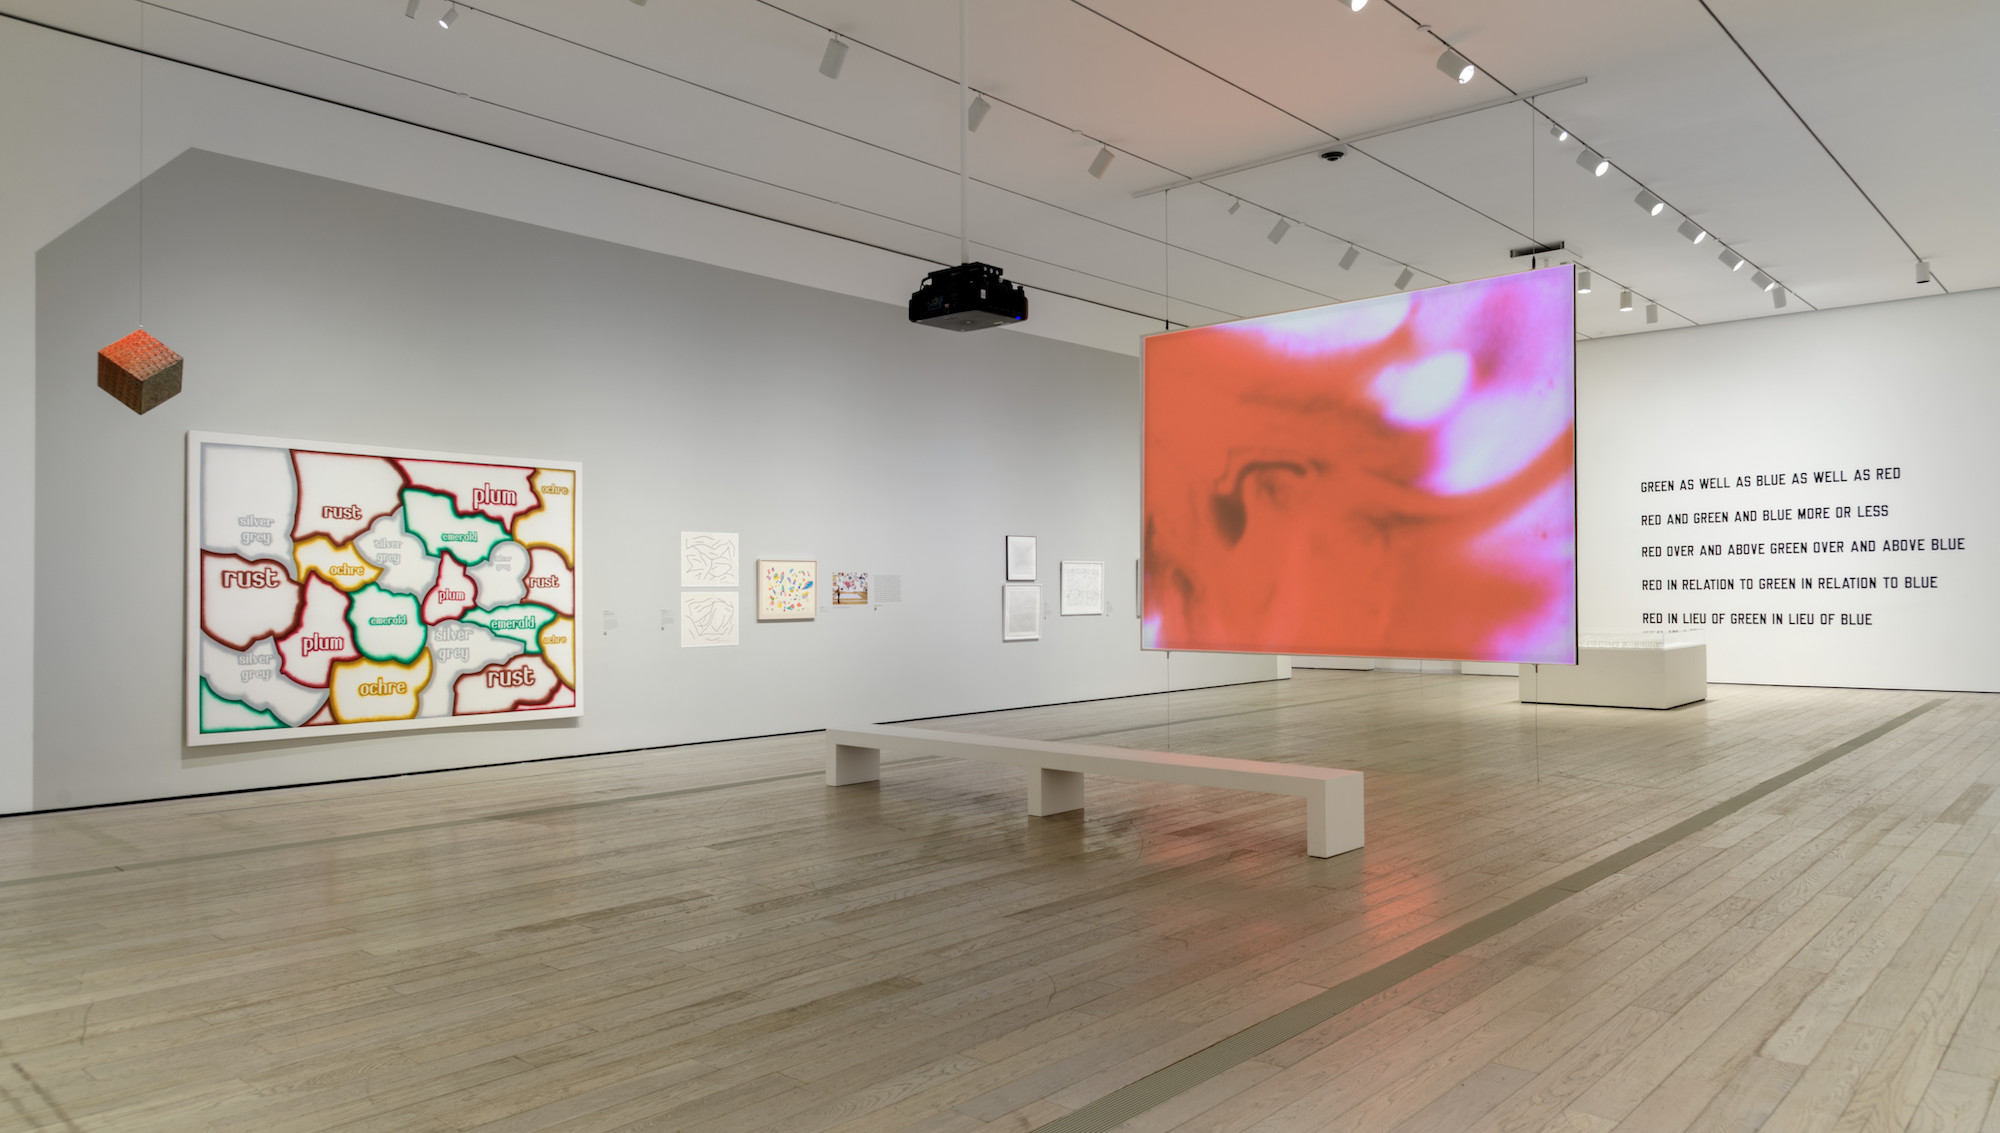 A view of the gallery with smooth tan wooden floors, a large colorful map hangs on a wall as well as large wall text on the far end of the gallery.